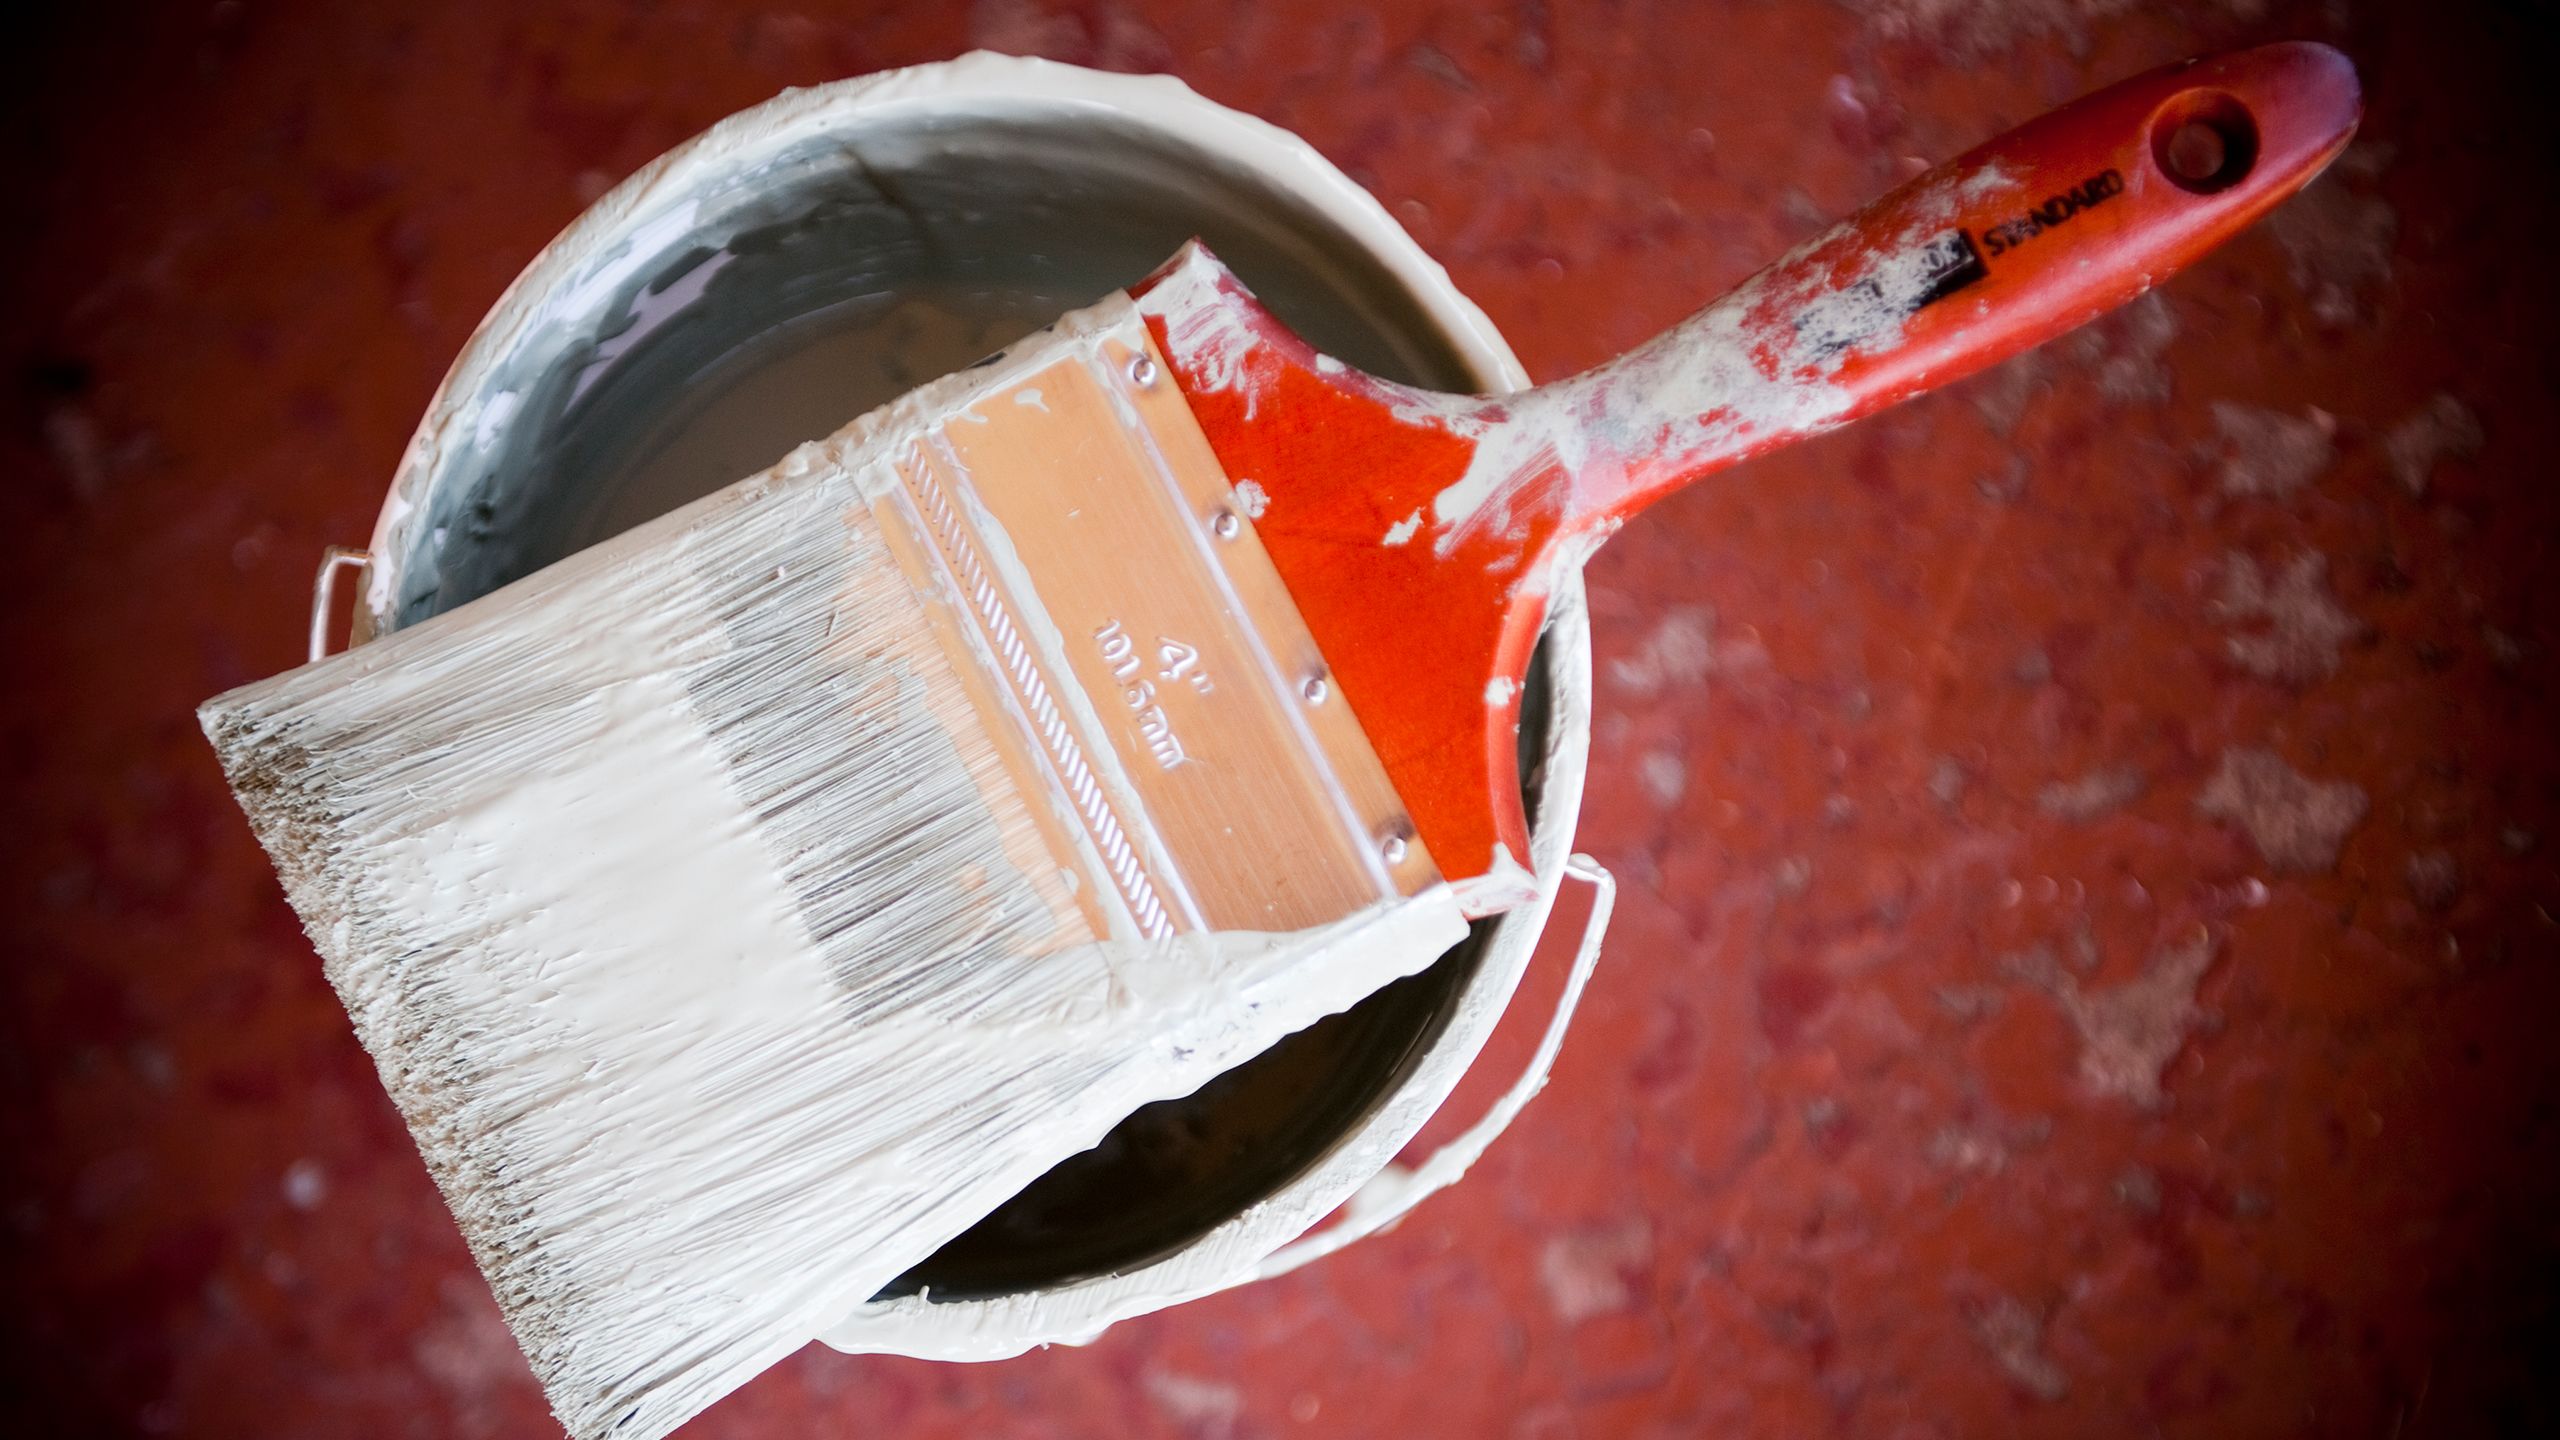 direct down shot of a paintbrush on an open can of white paint, on top of a red background